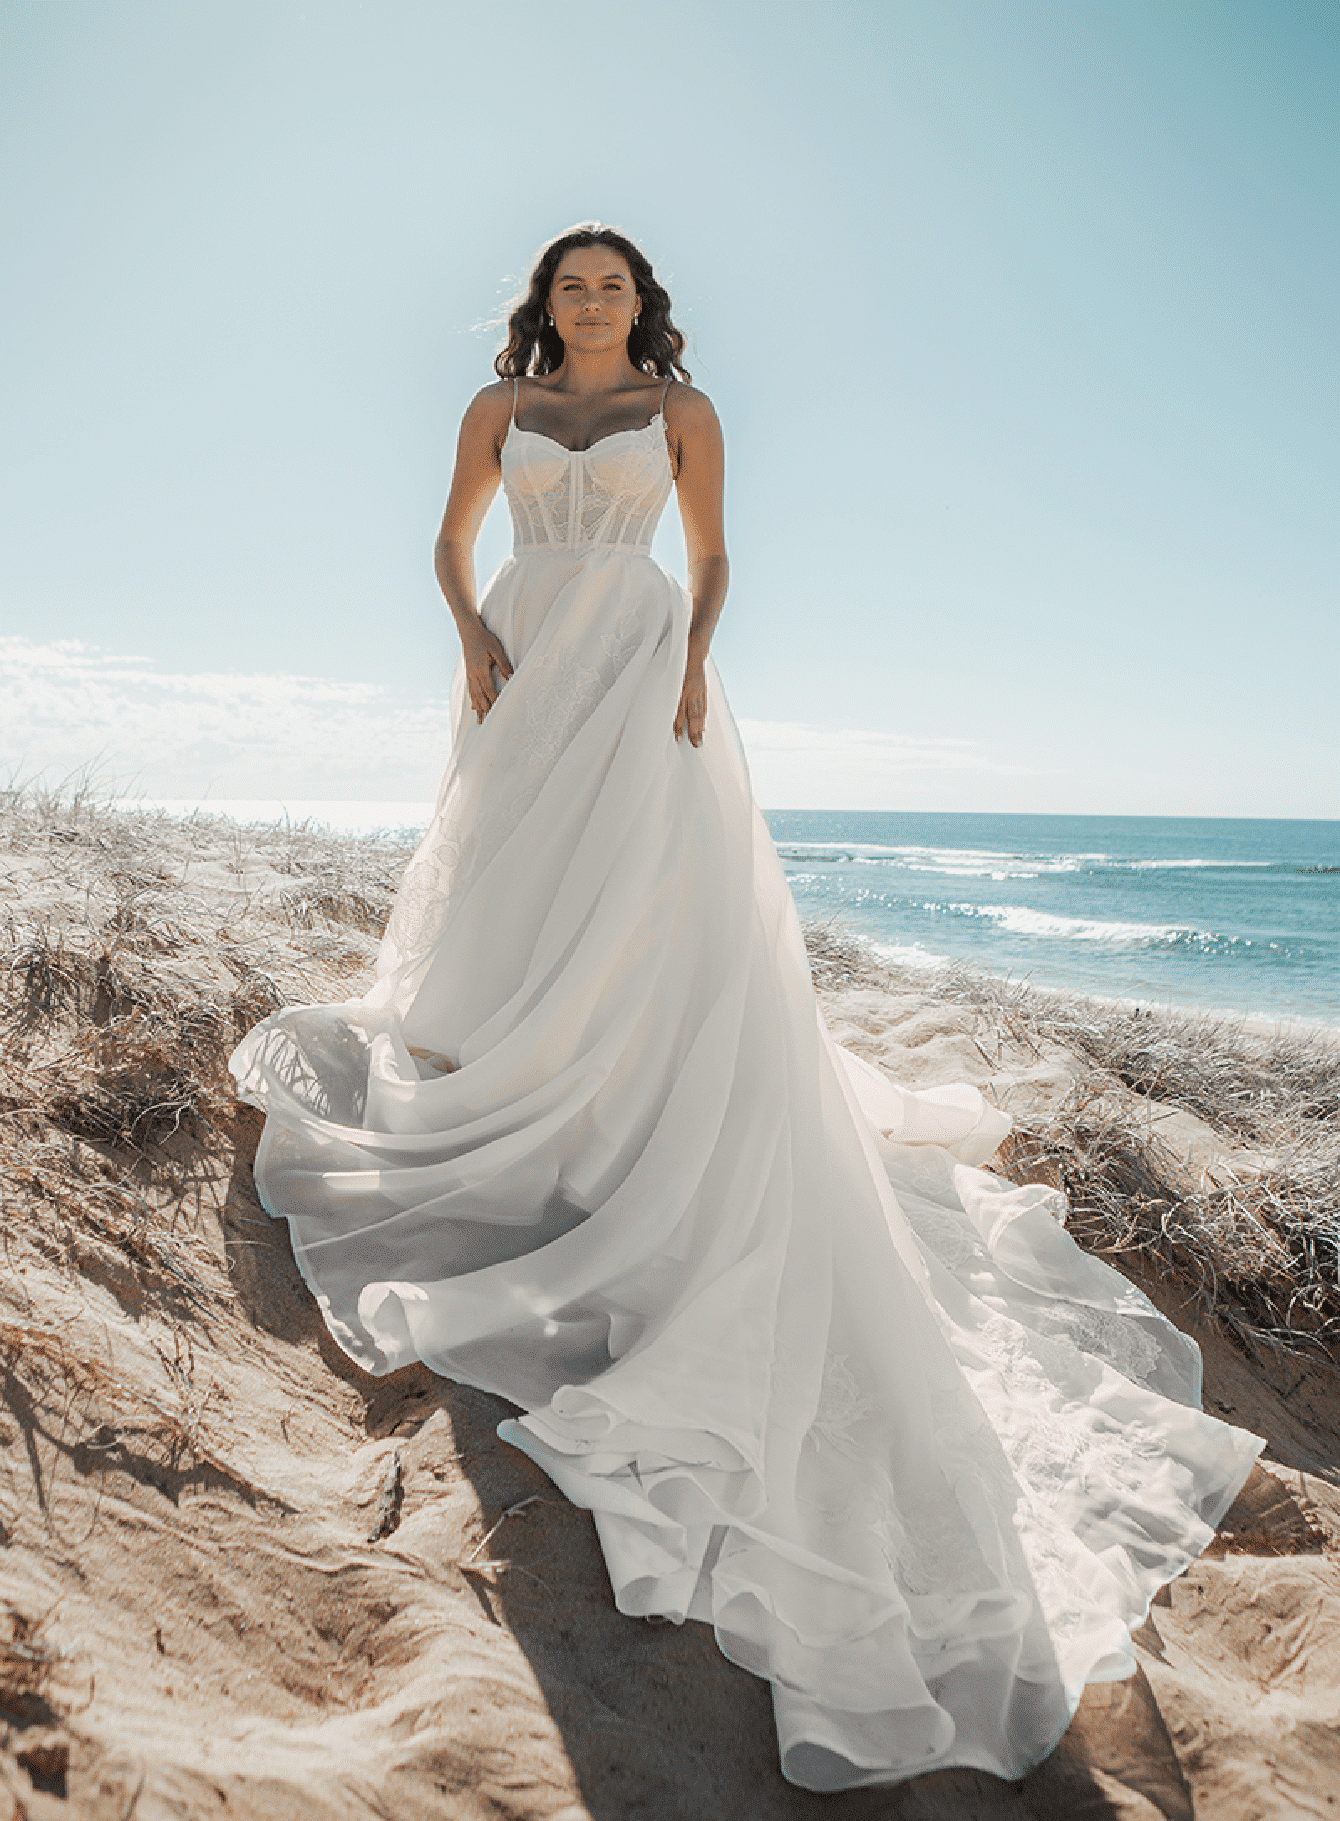 Peter Trends Bridal, Australia, offers Washington brides a wide selection of highly personal, customizable wedding dresses with effortlessly chic and wildly romantic vibes